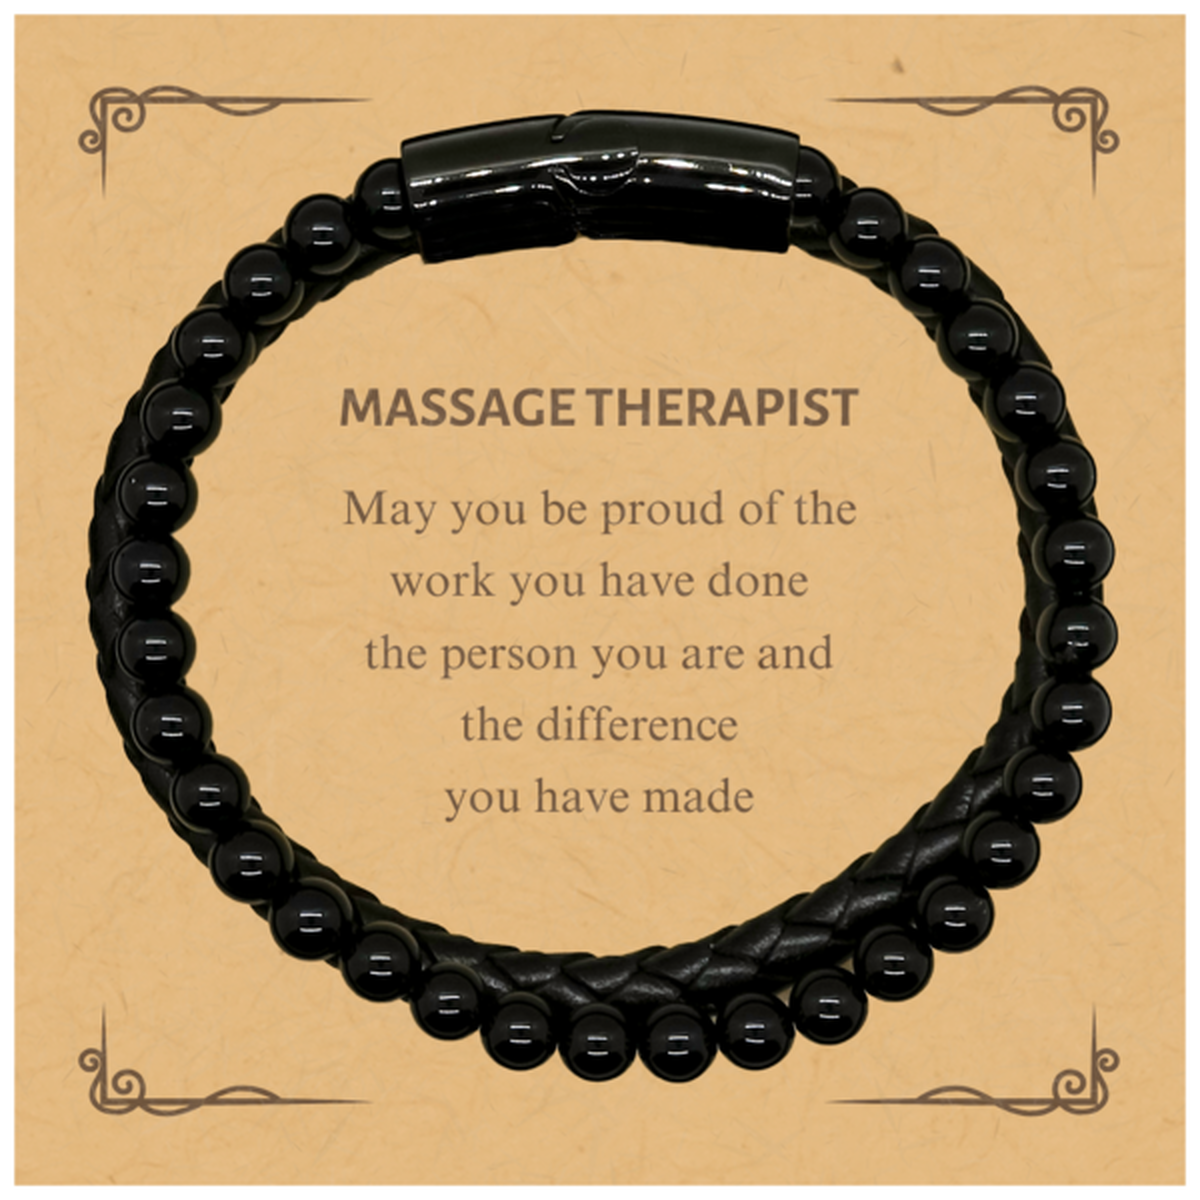 Massage Therapist May you be proud of the work you have done, Retirement Massage Therapist Stone Leather Bracelets for Colleague Appreciation Gifts Amazing for Massage Therapist